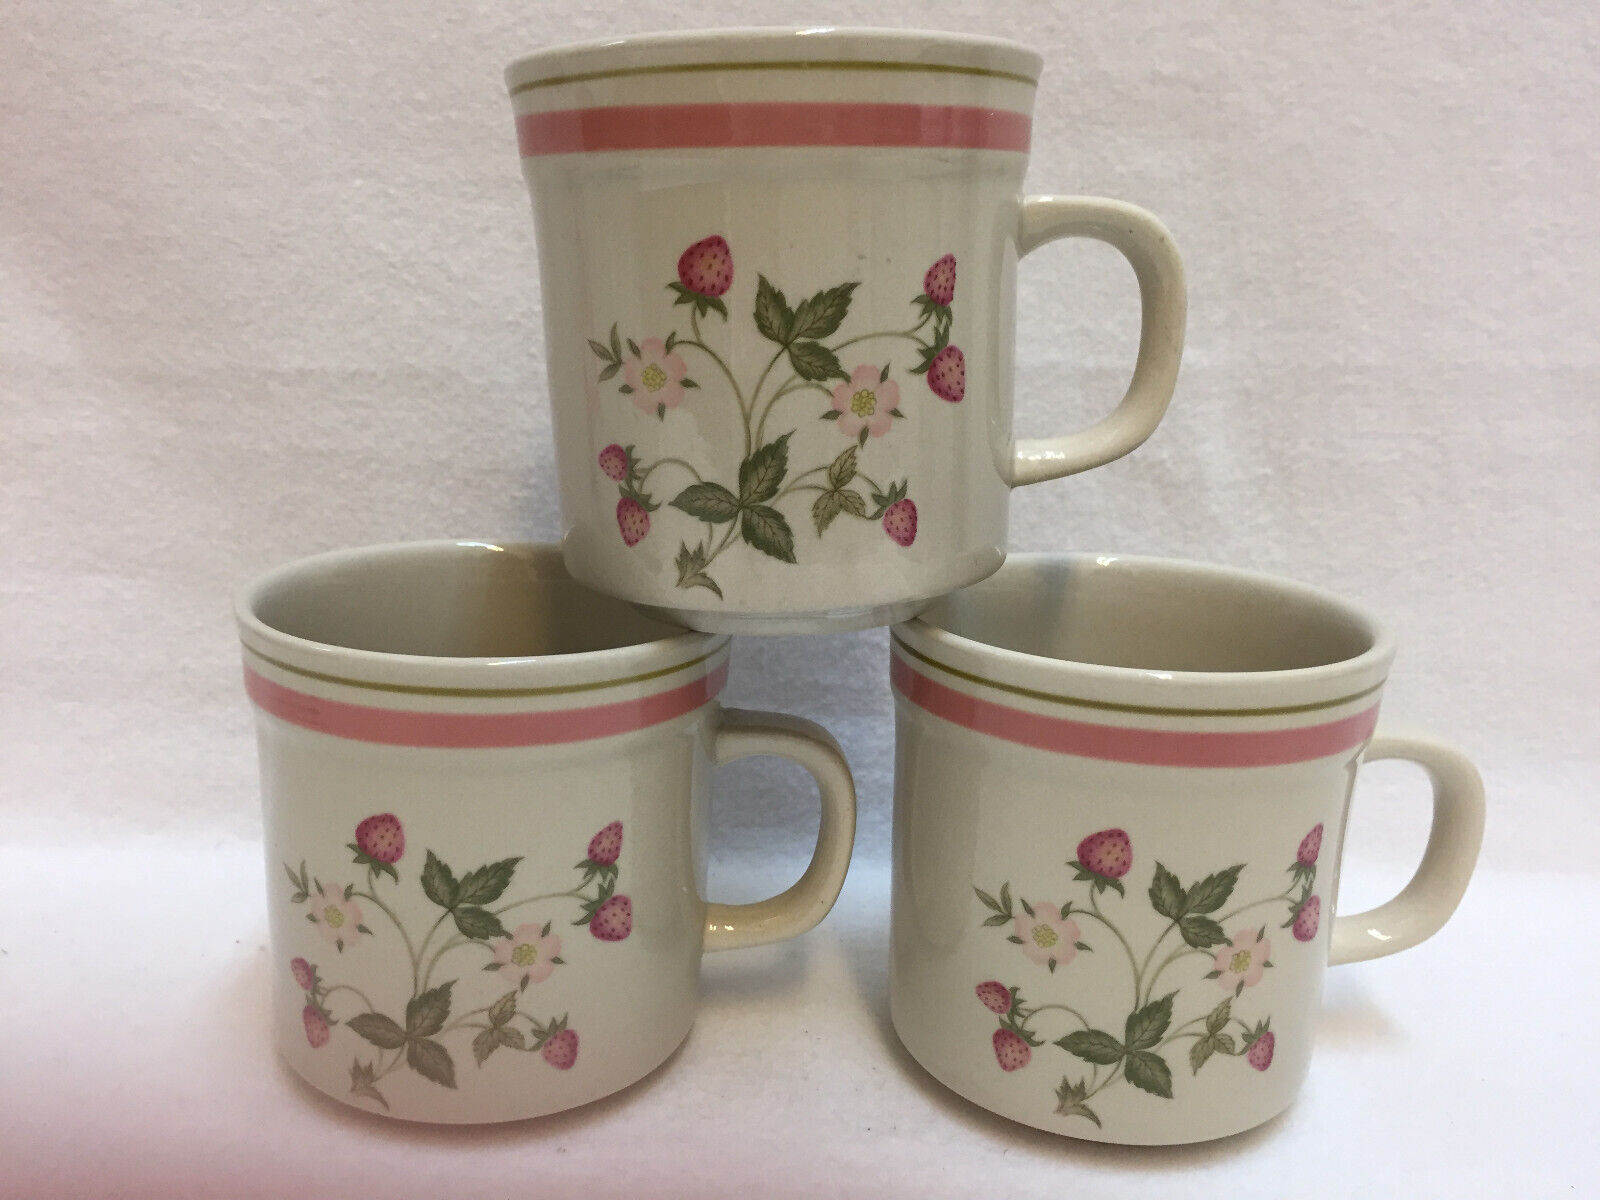 Strawberry Patch by Newcor Stoneware 8 oz Cup Vintage Mug Set of 3 Newcor Stoneware Strawberry Patch